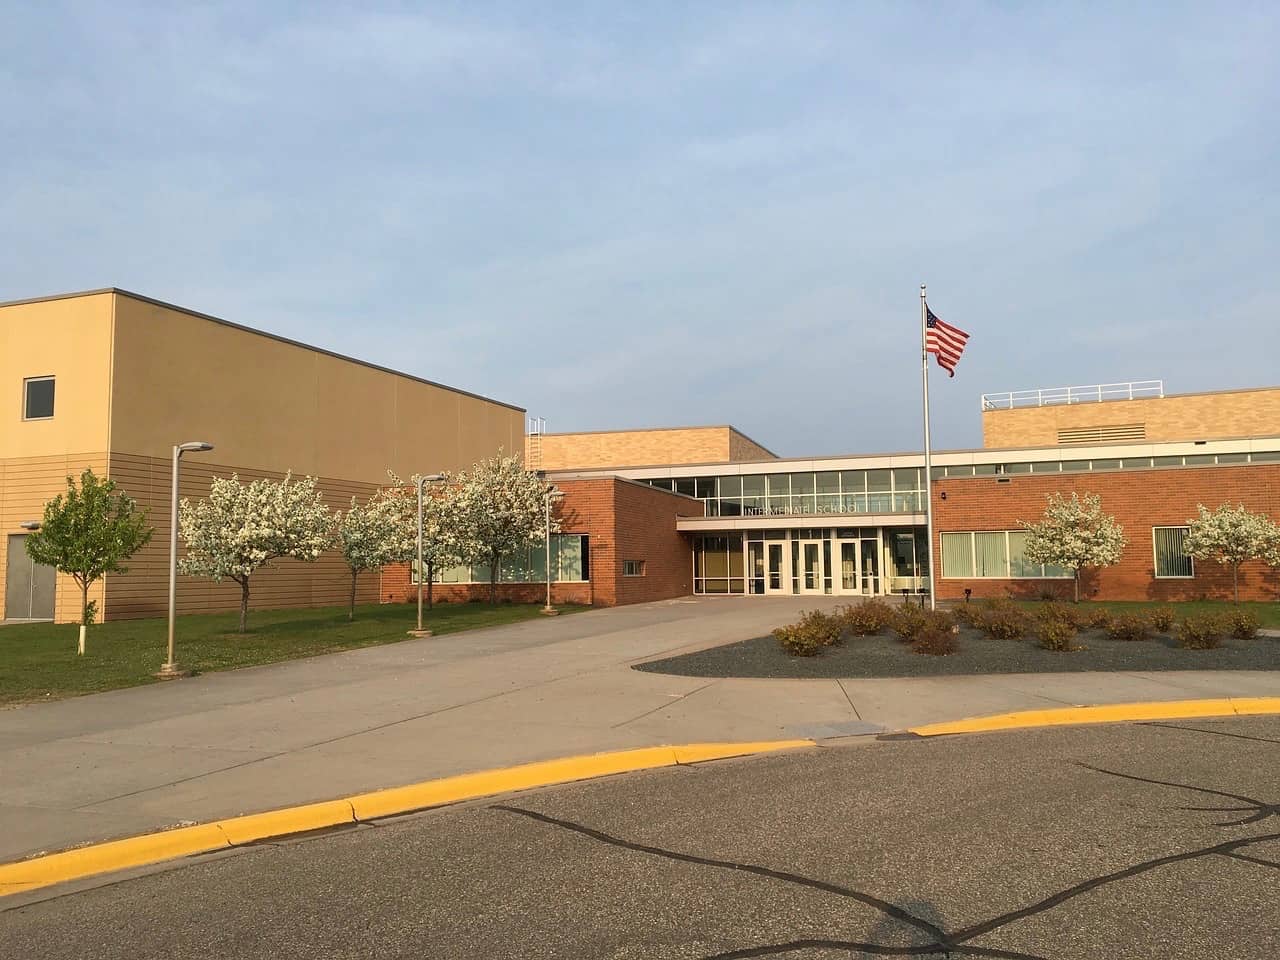 Utilizing Window Films to Improve School Security & Student Safety